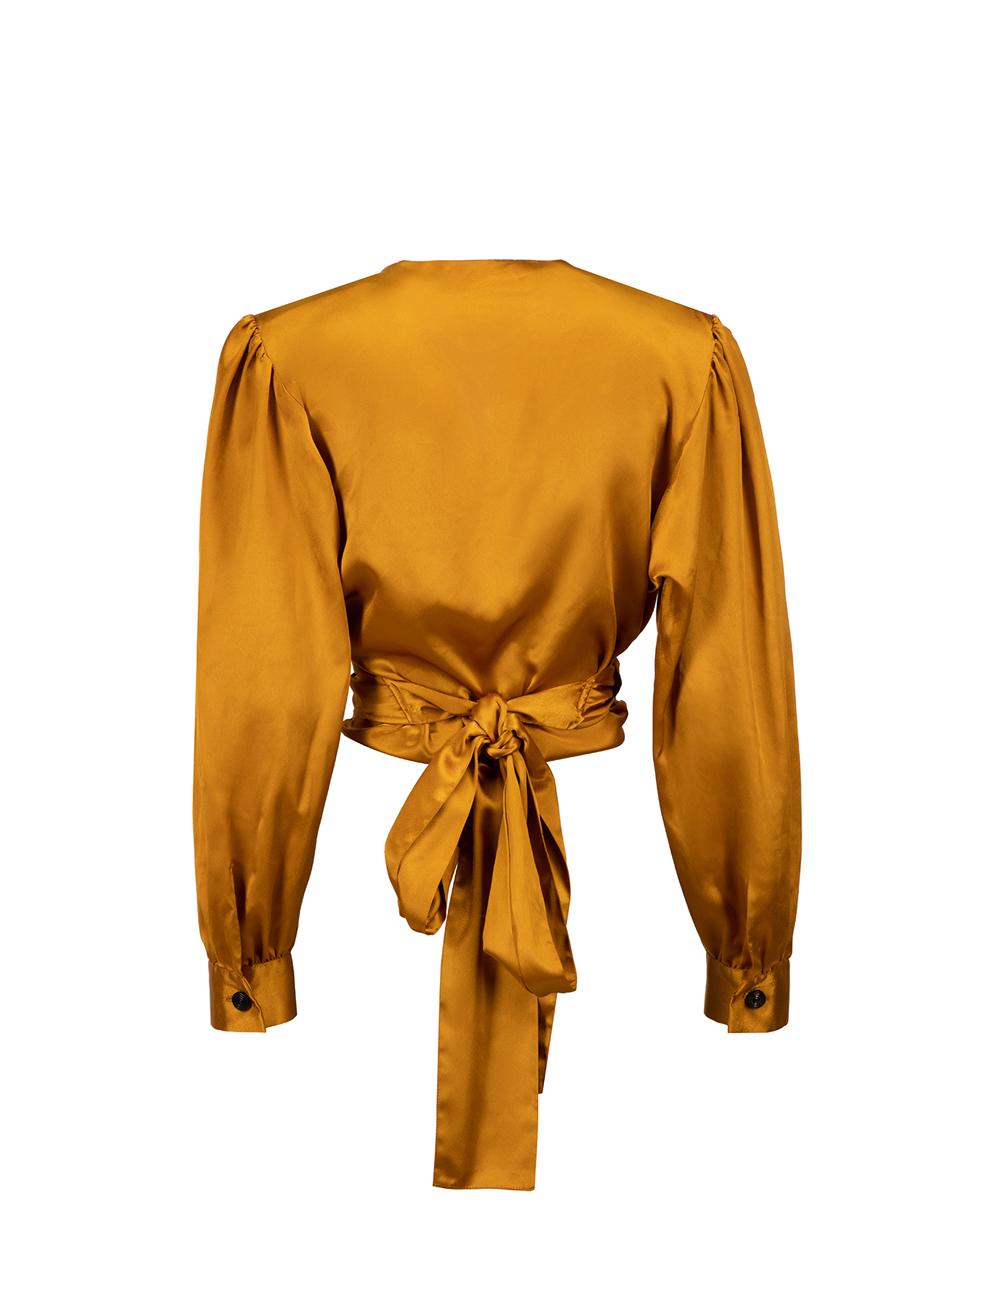 Saint Laurent Vintage Orange Long Sleeves Wrap Blouse Size M In Good Condition For Sale In London, GB